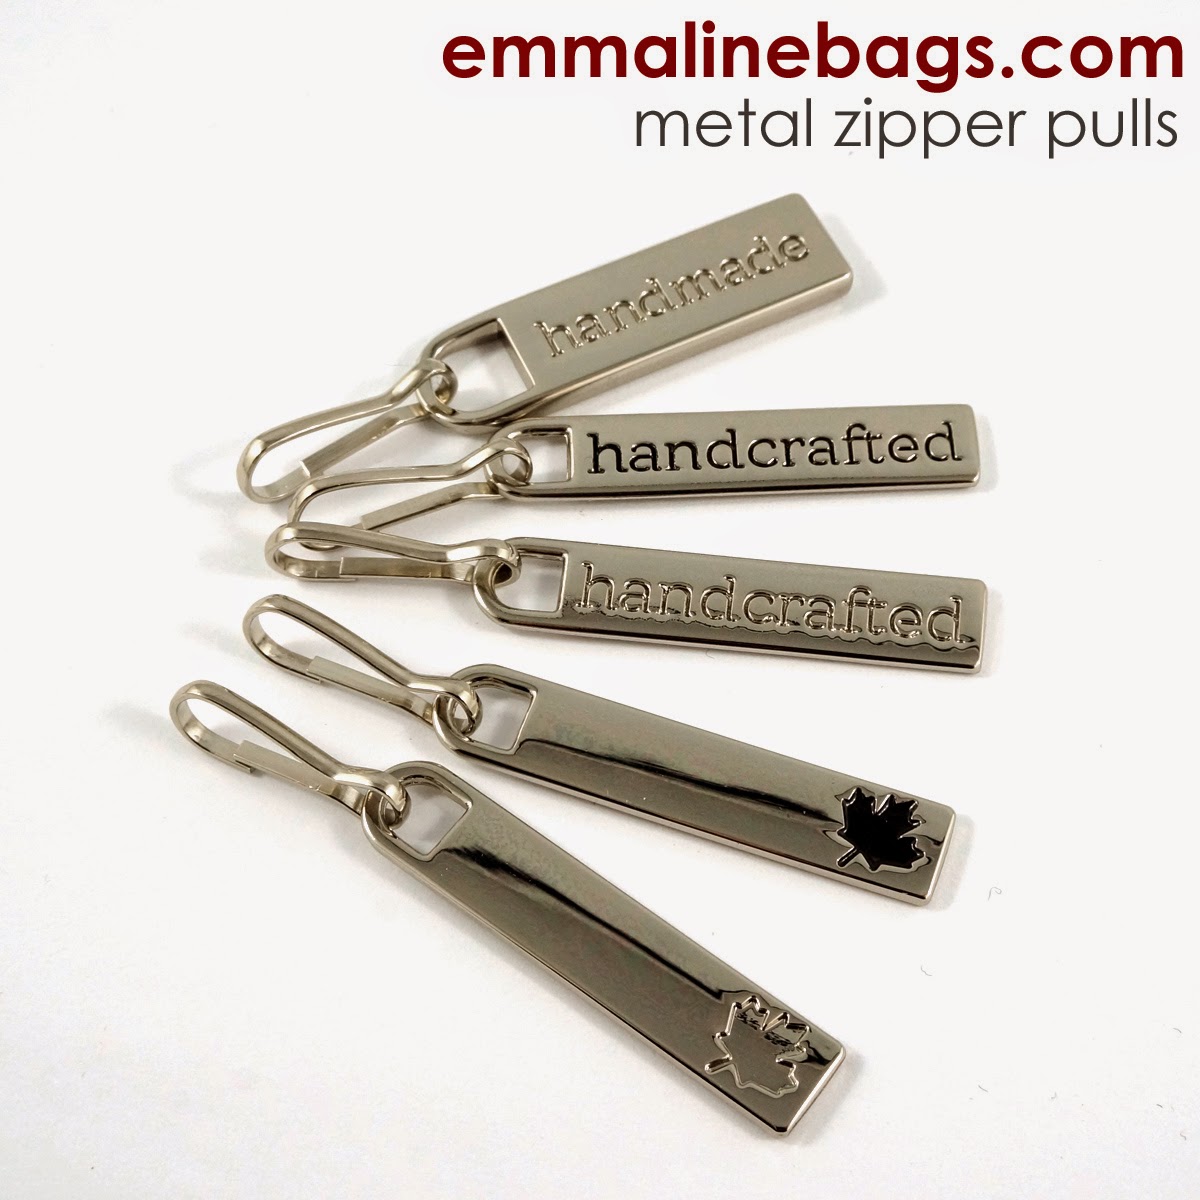 Metal zipper pulls for bags and purses.